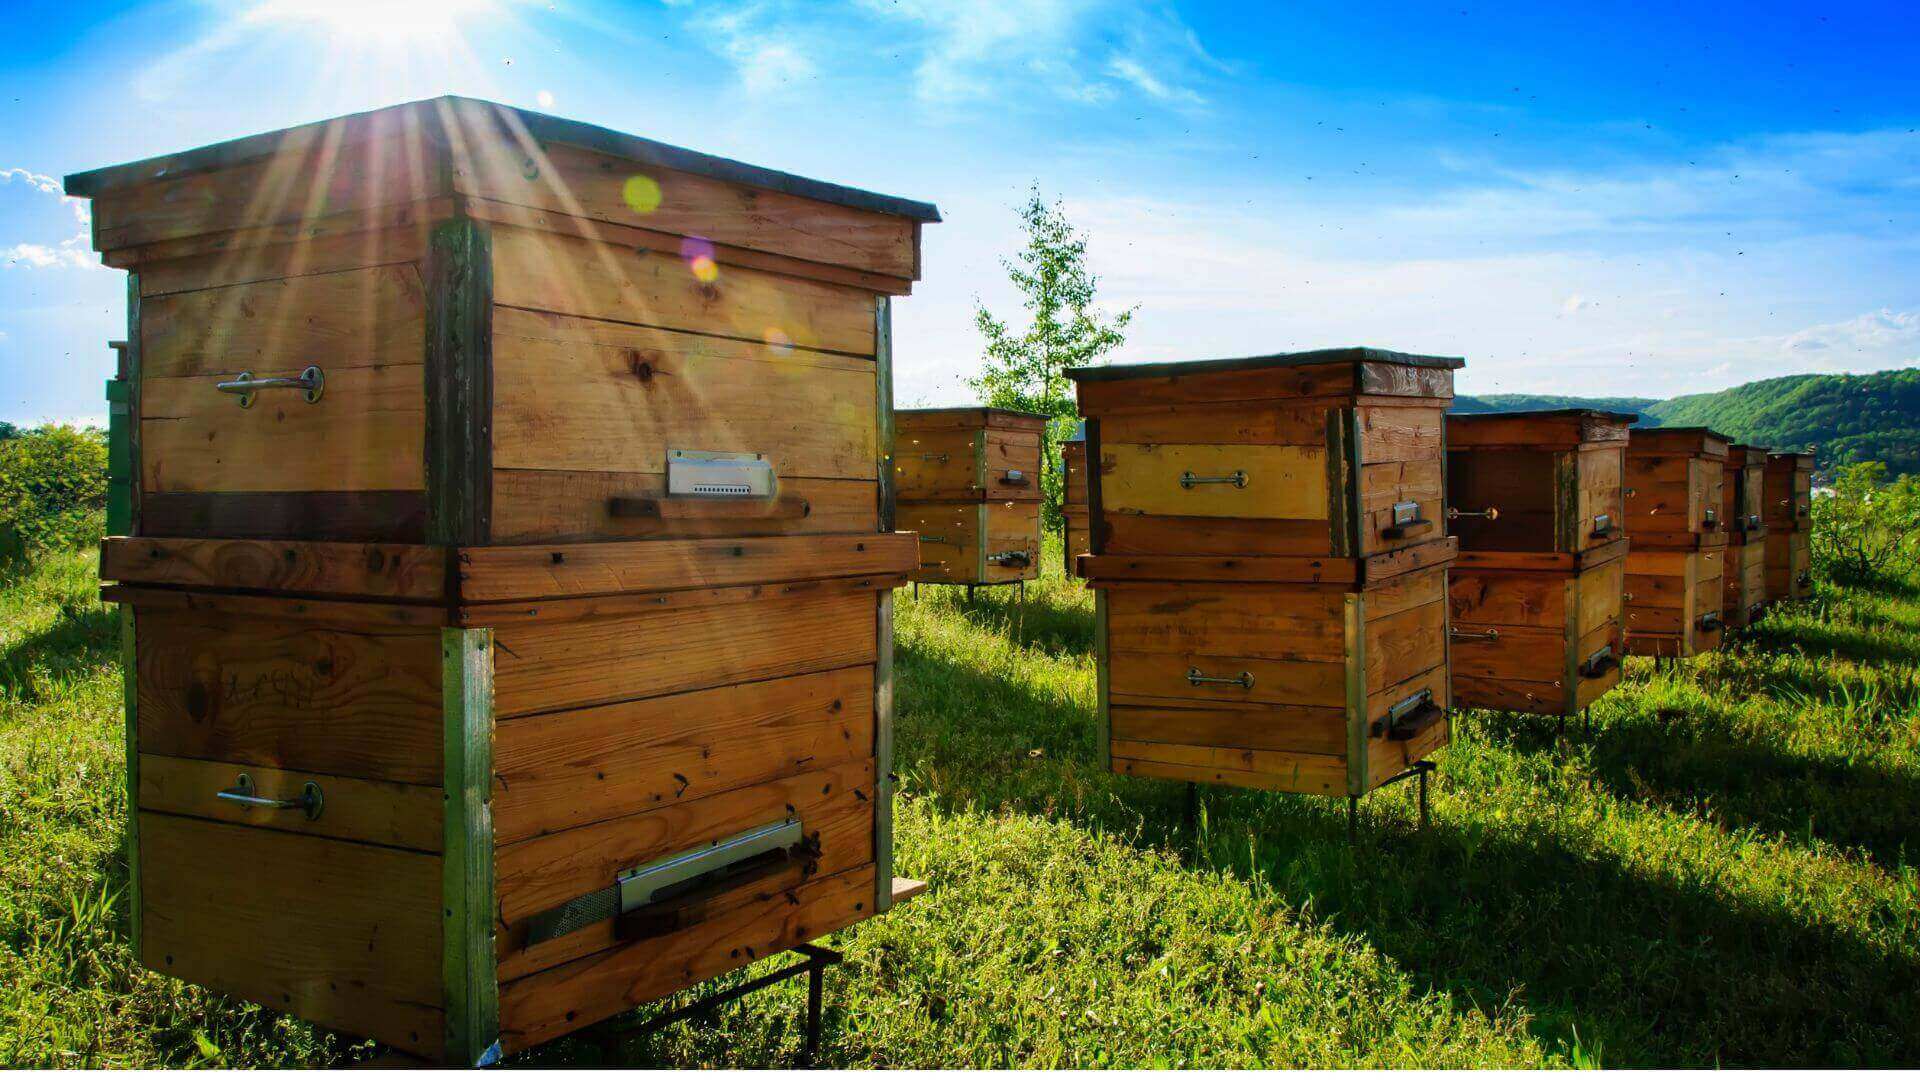 Collombatti Naturals 7 compelling reasons to buy Australian beeswax picture of beehives in sunshine